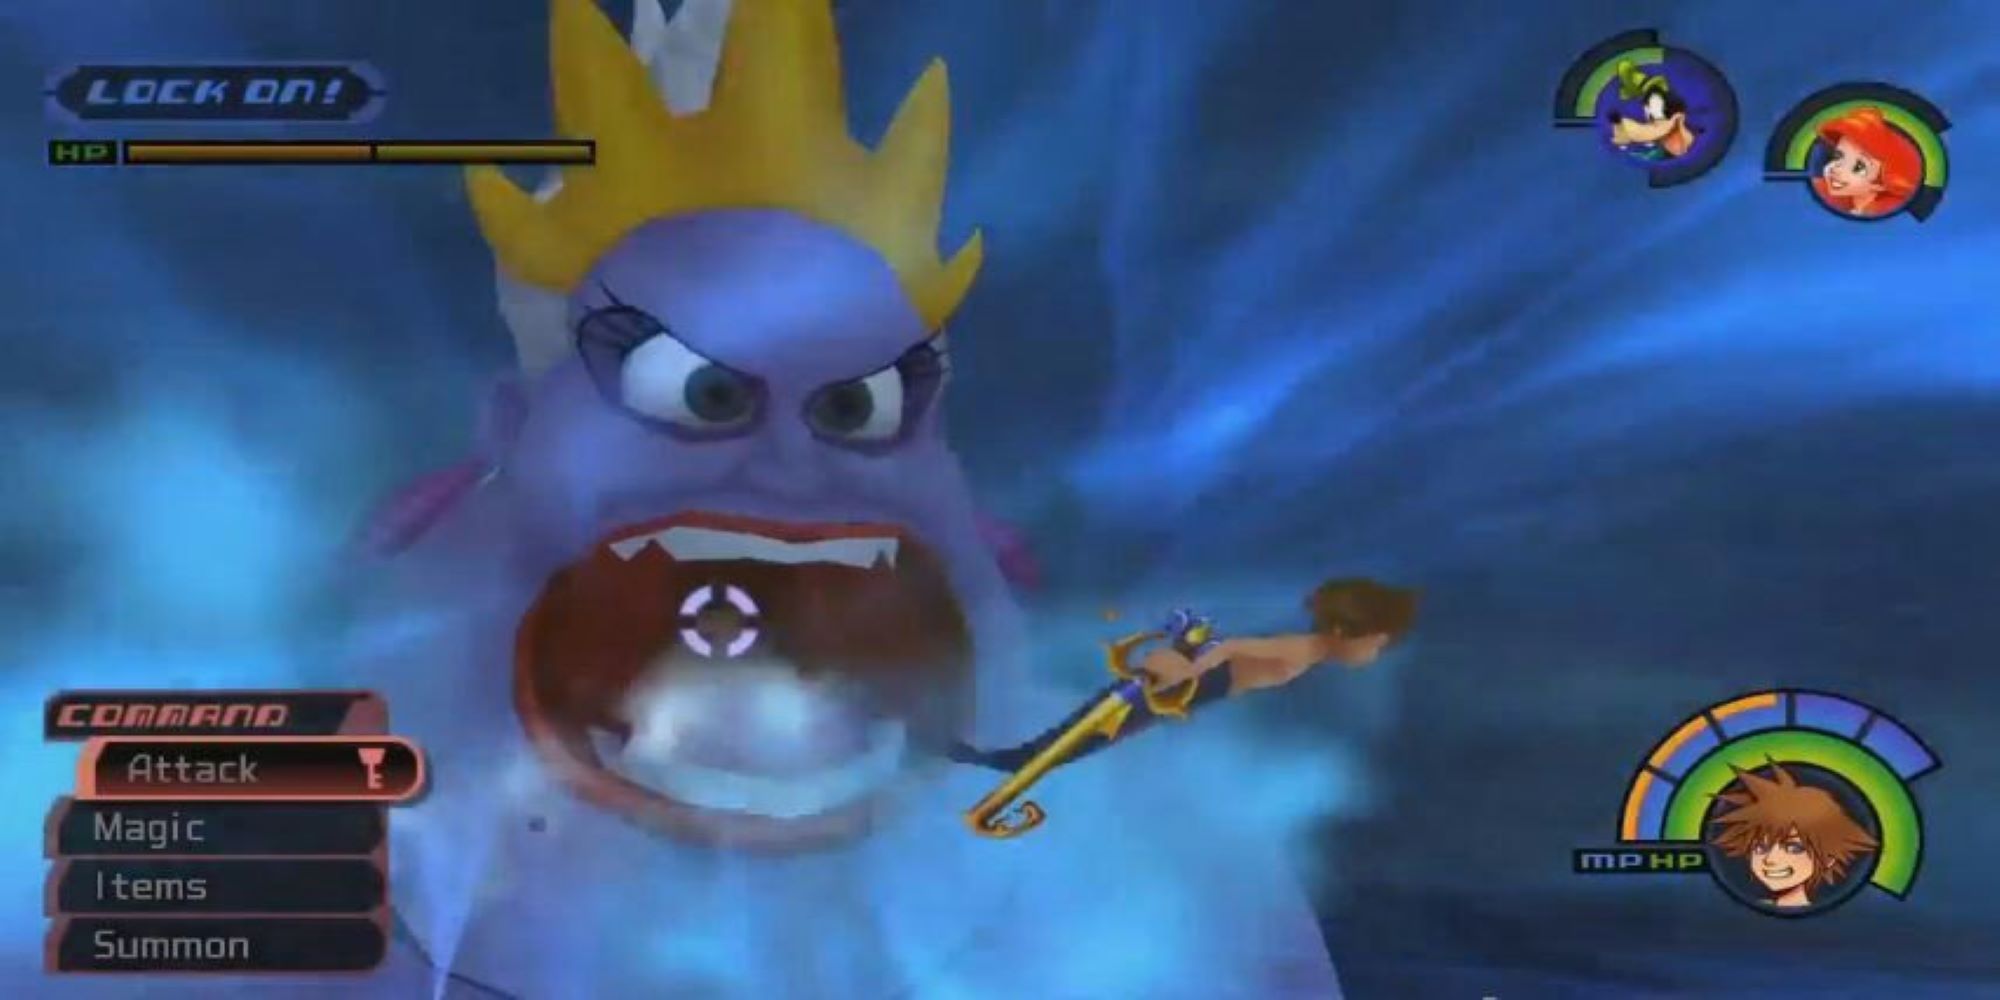 Ursula uses her powerful diaphragm to suck in Sora during this boss battle from Kingdom Hearts.